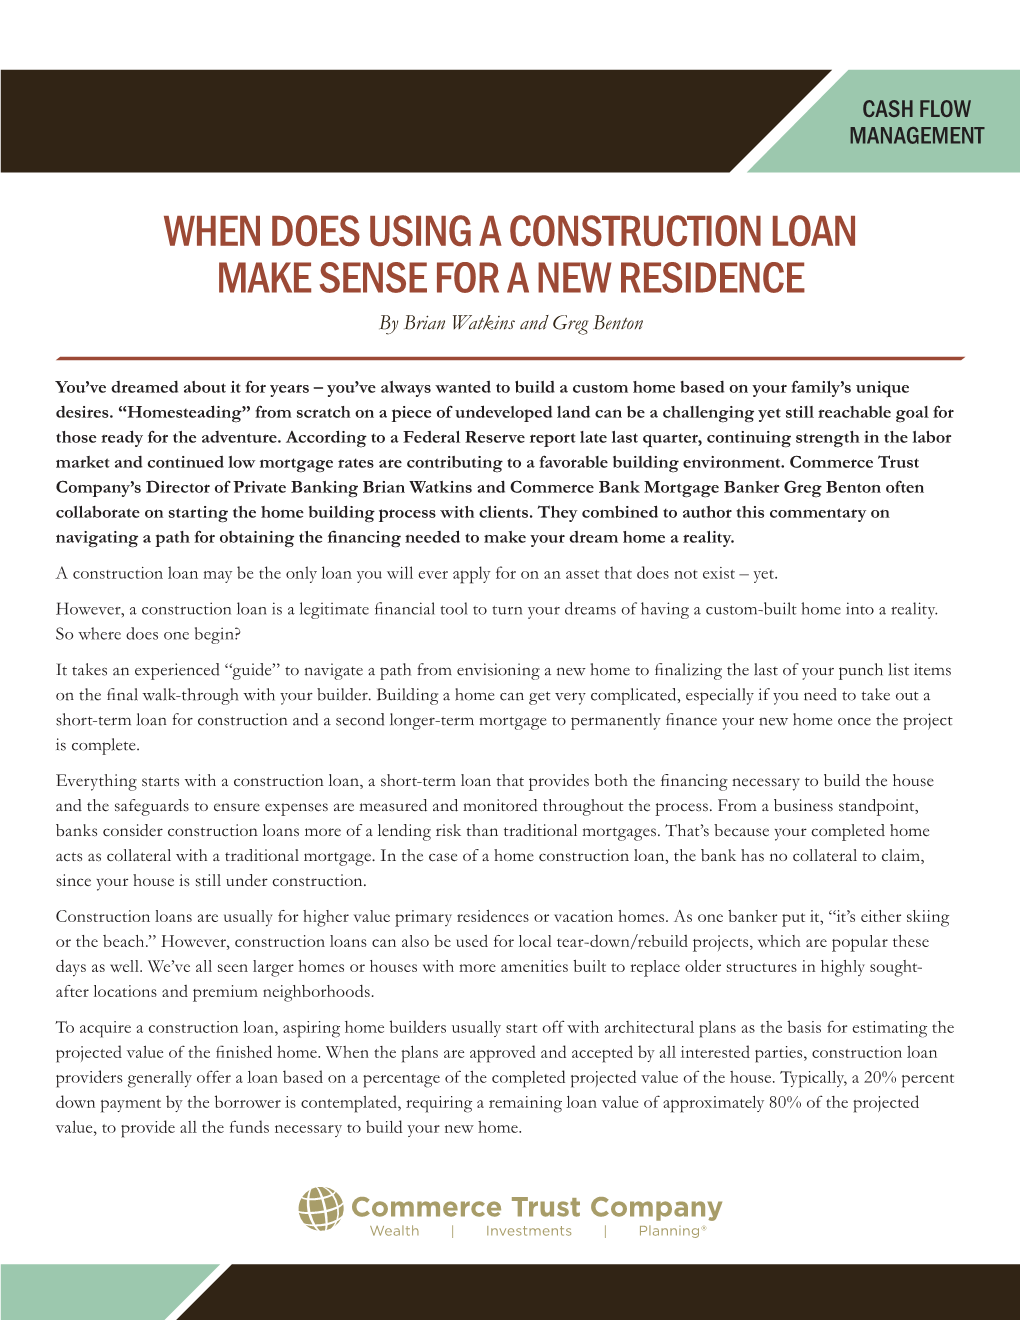 WHEN DOES USING a CONSTRUCTION LOAN MAKE SENSE for a NEW RESIDENCE by Brian Watkins and Greg Benton